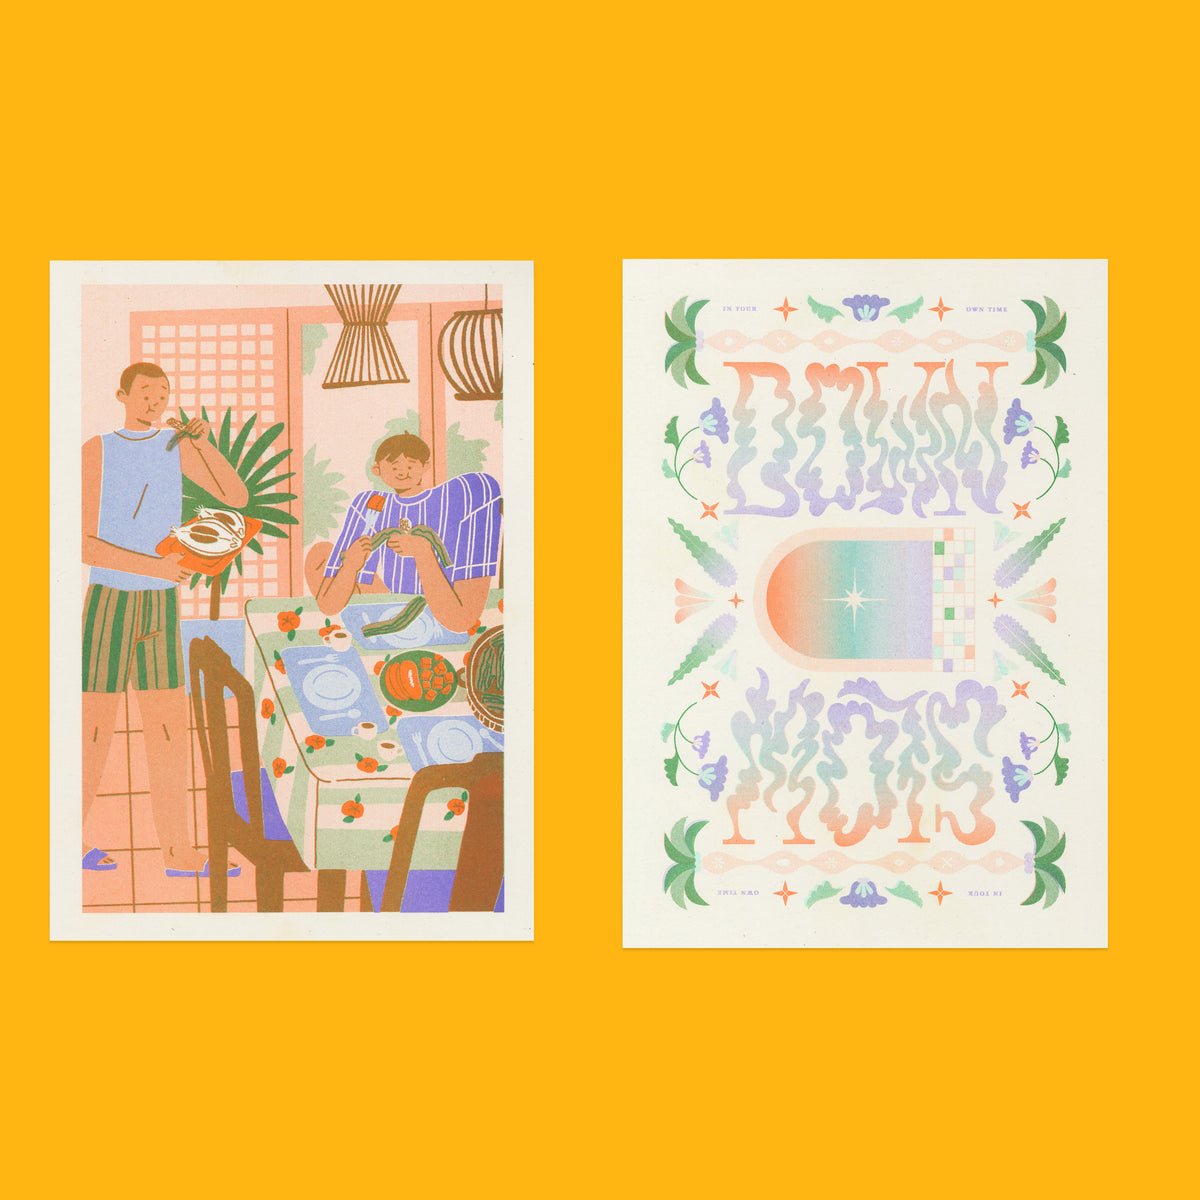 No. 59: Philippines - RISO CLUB Back Issue